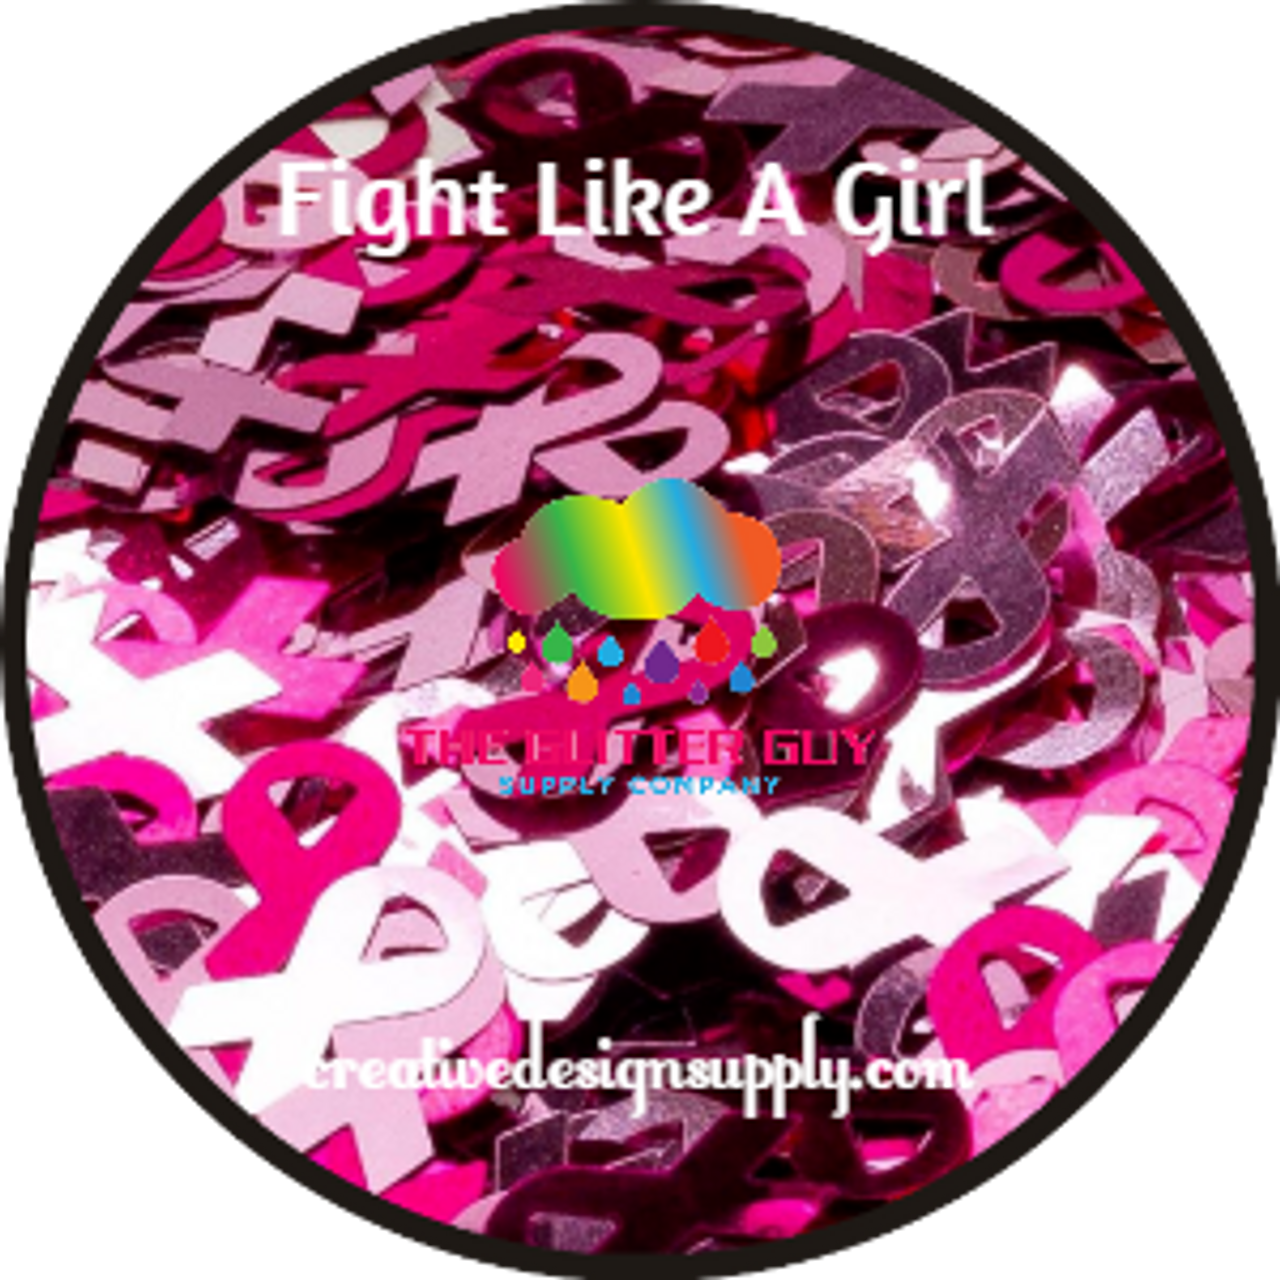 The Glitter Guy Shapes | Fight Like A Girl